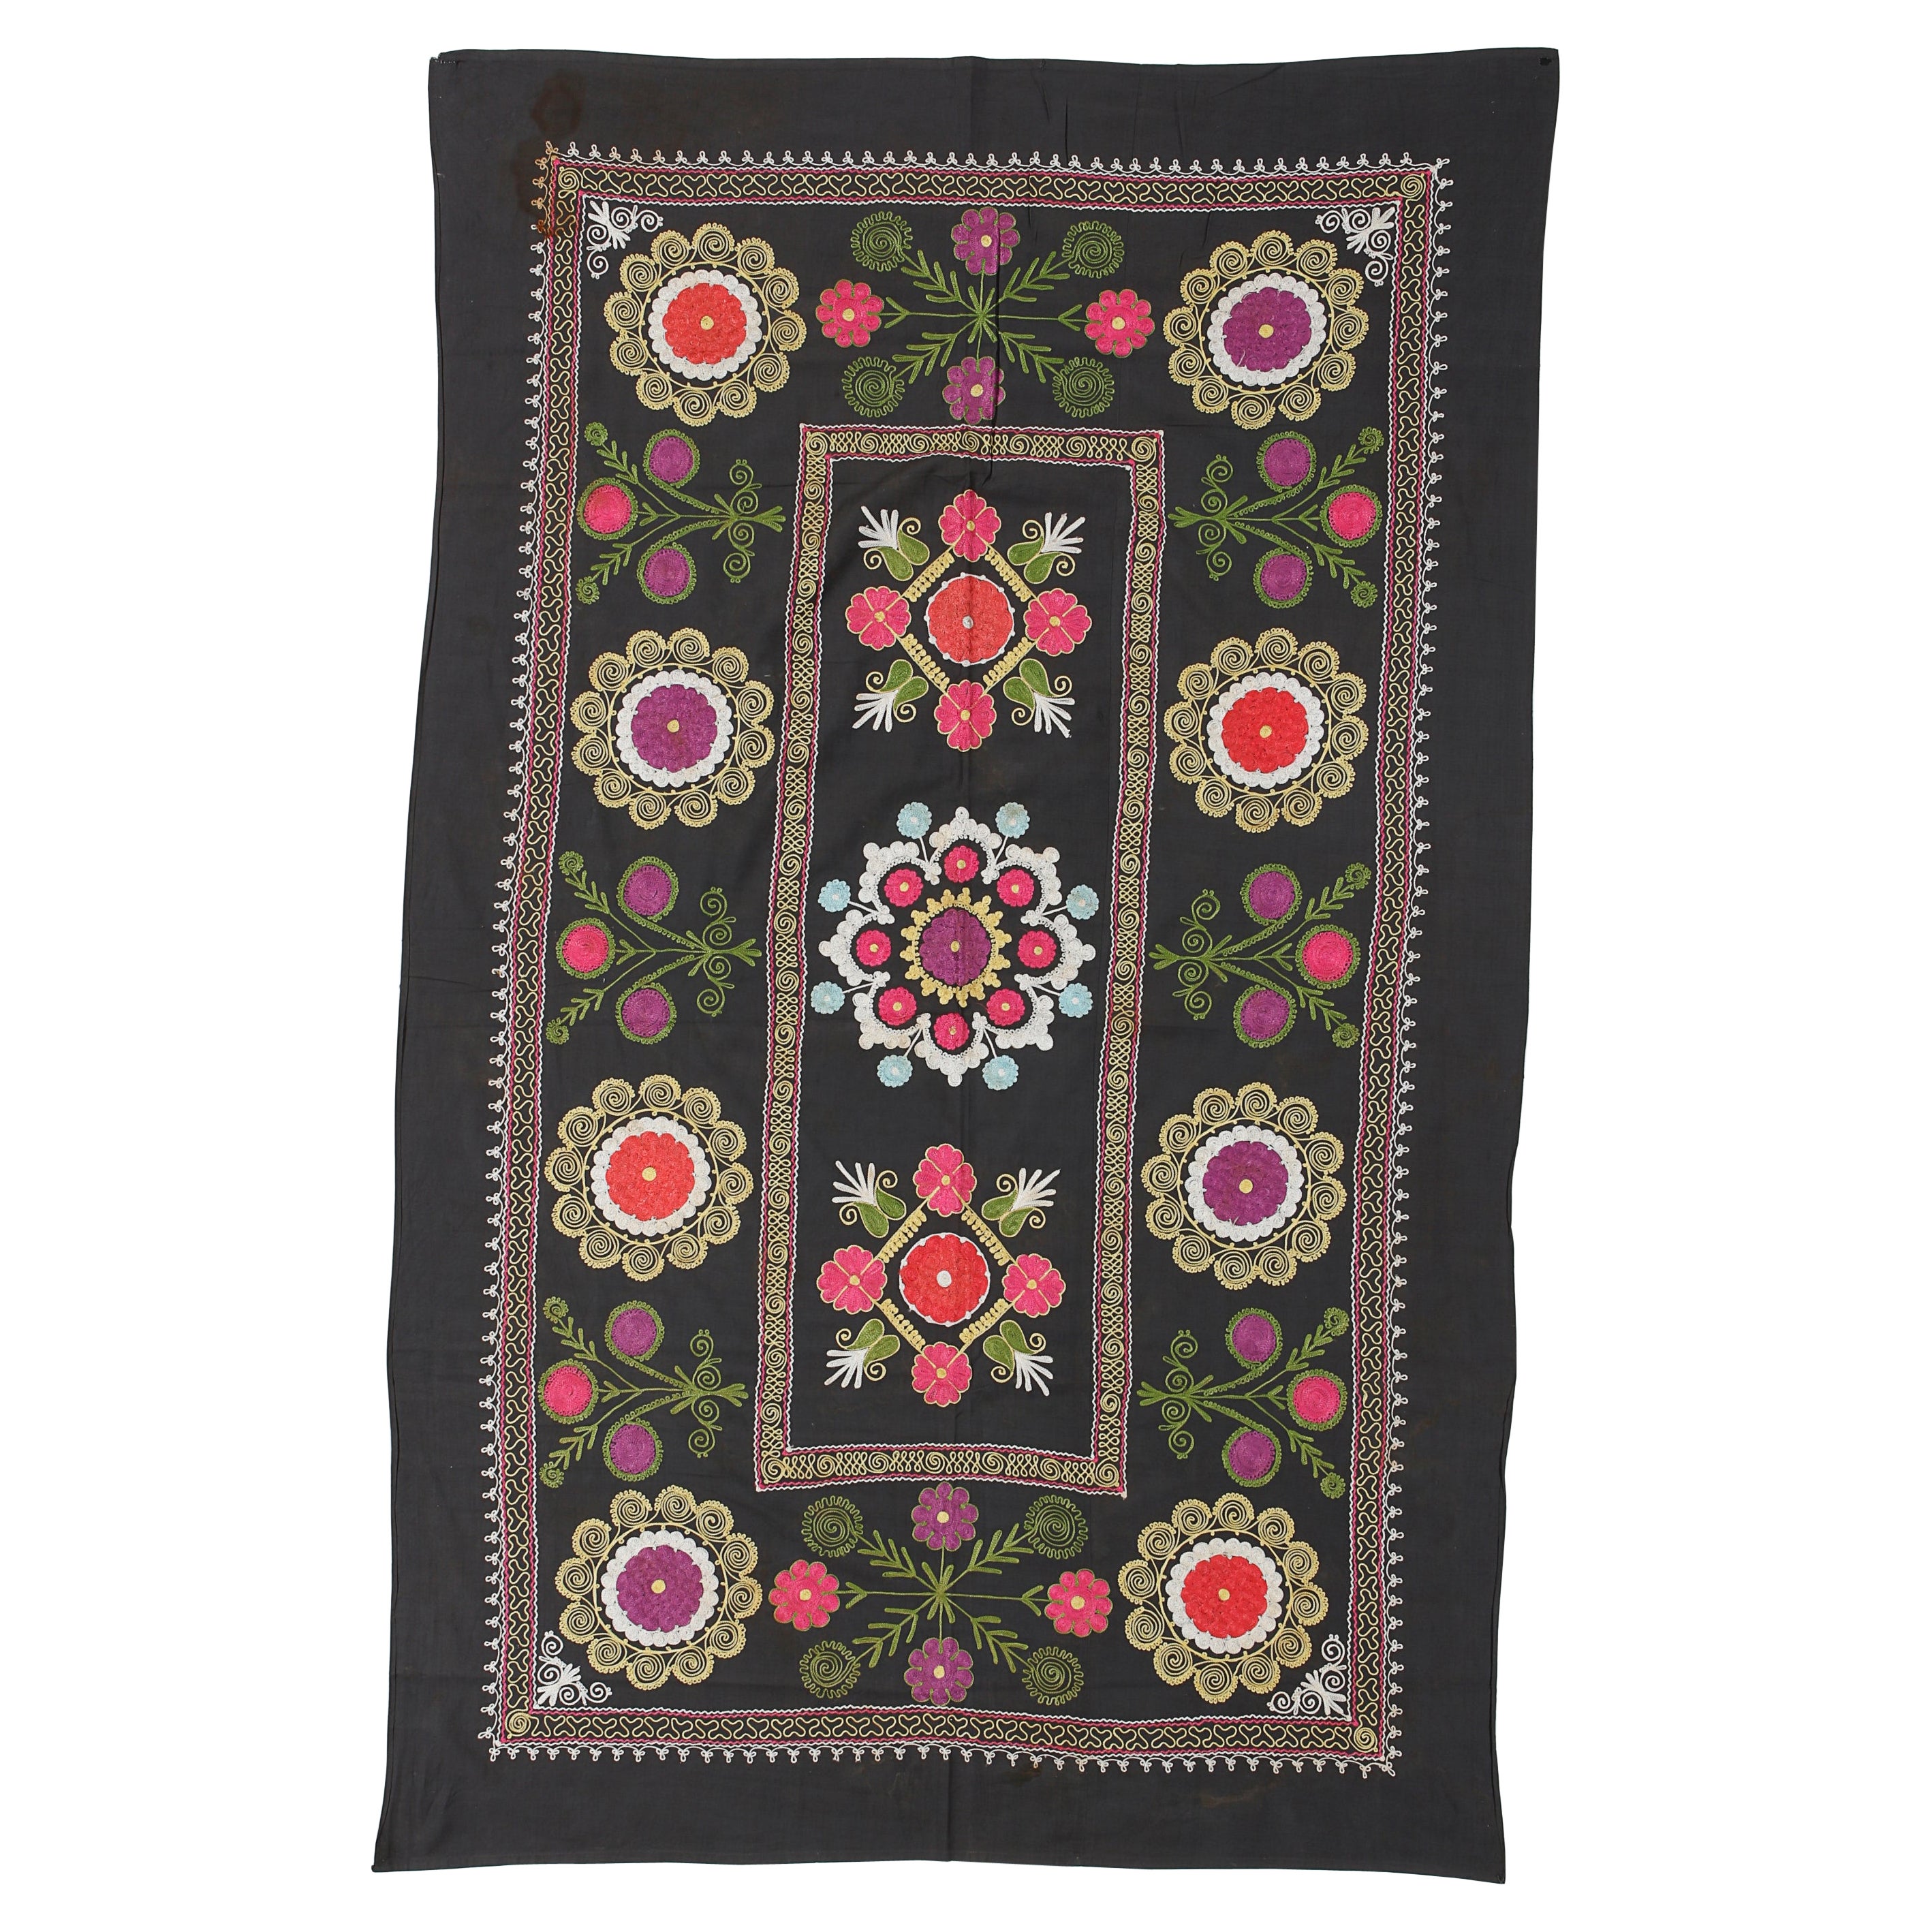 4x6.3 Ft Uzbek Silk Hand Embroidered Wall Hanging, Decorative Suzani Bed Cover